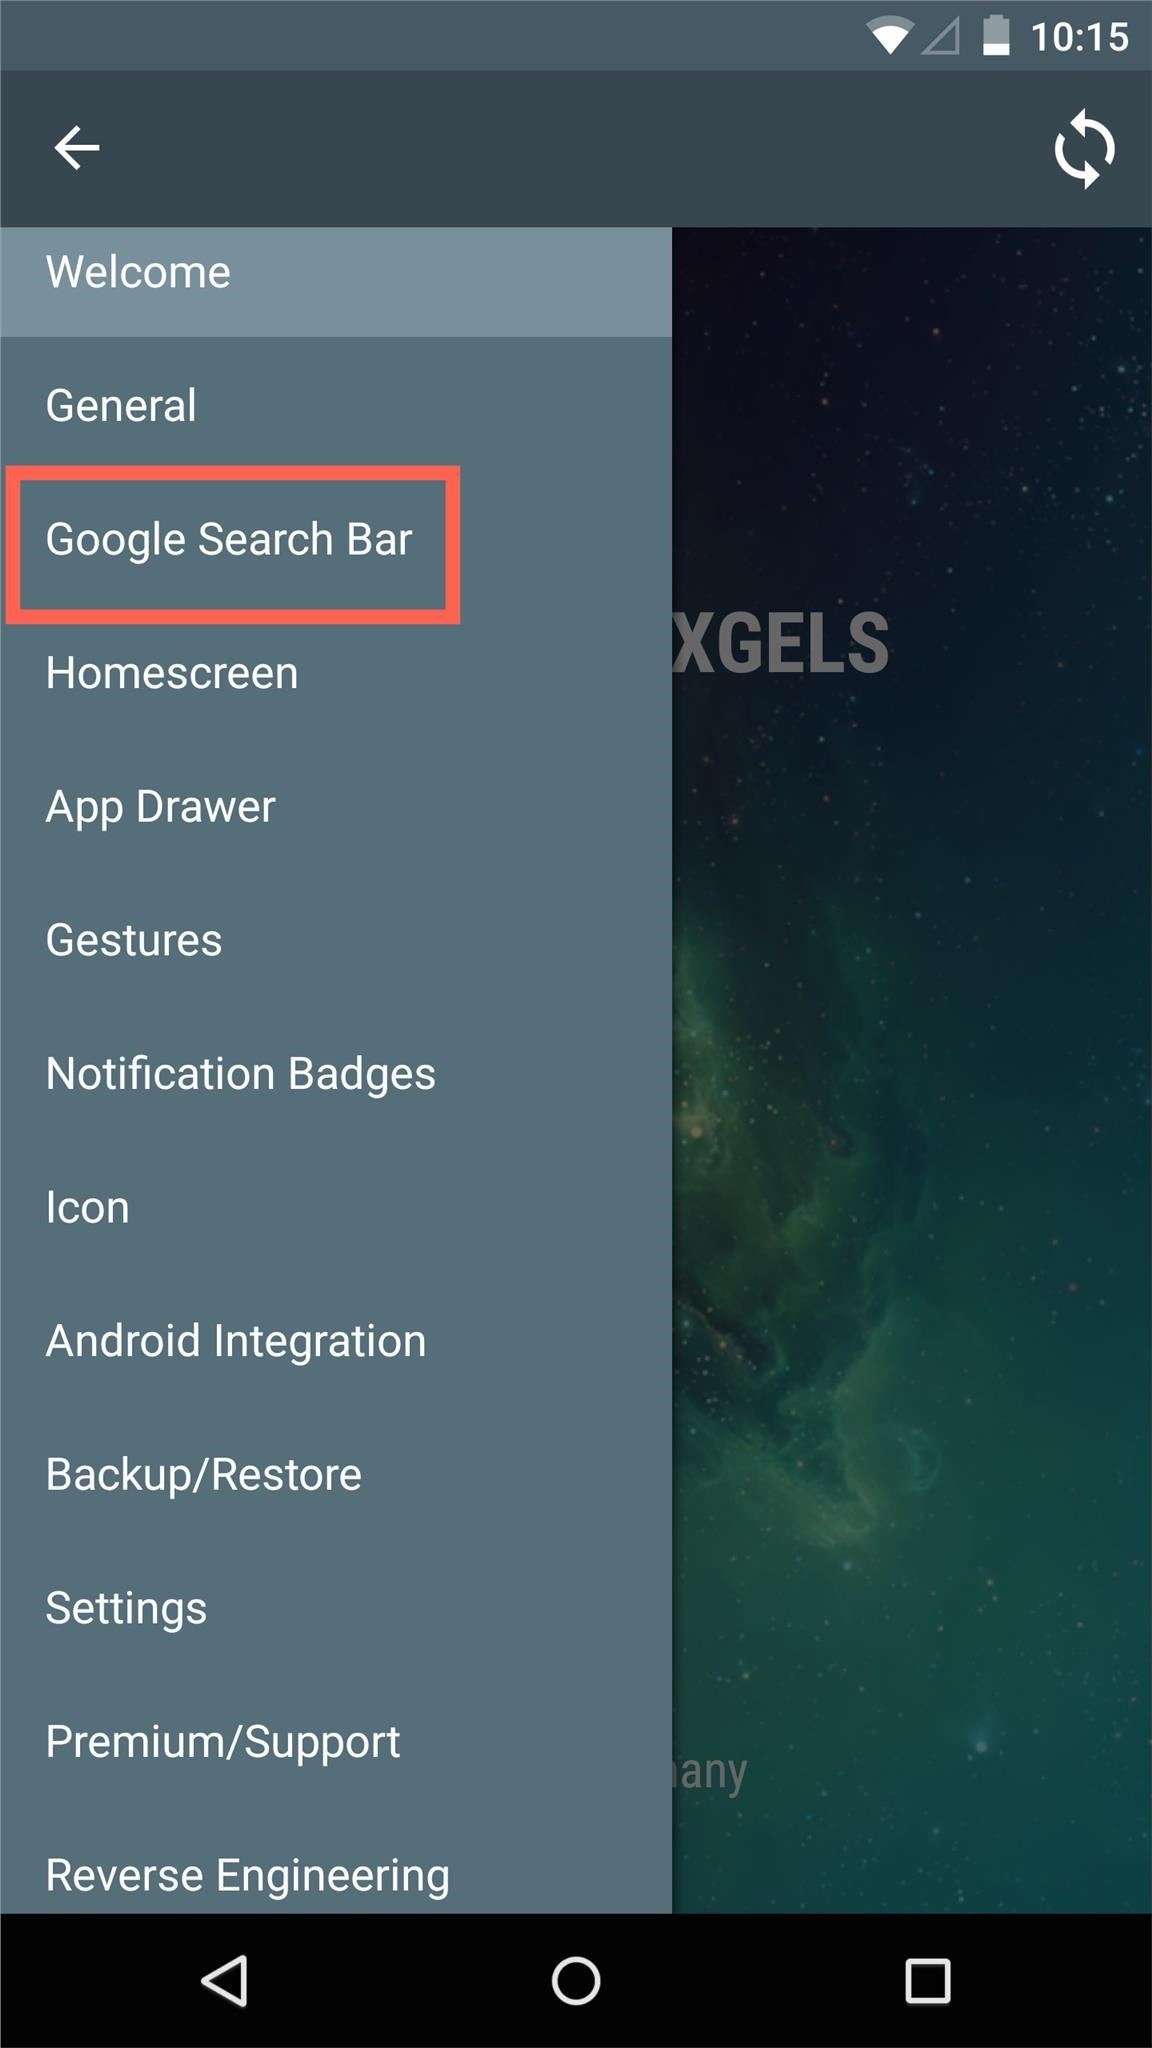 How to Customize or Remove the Home Screen Search Bar in the Google Now Launcher